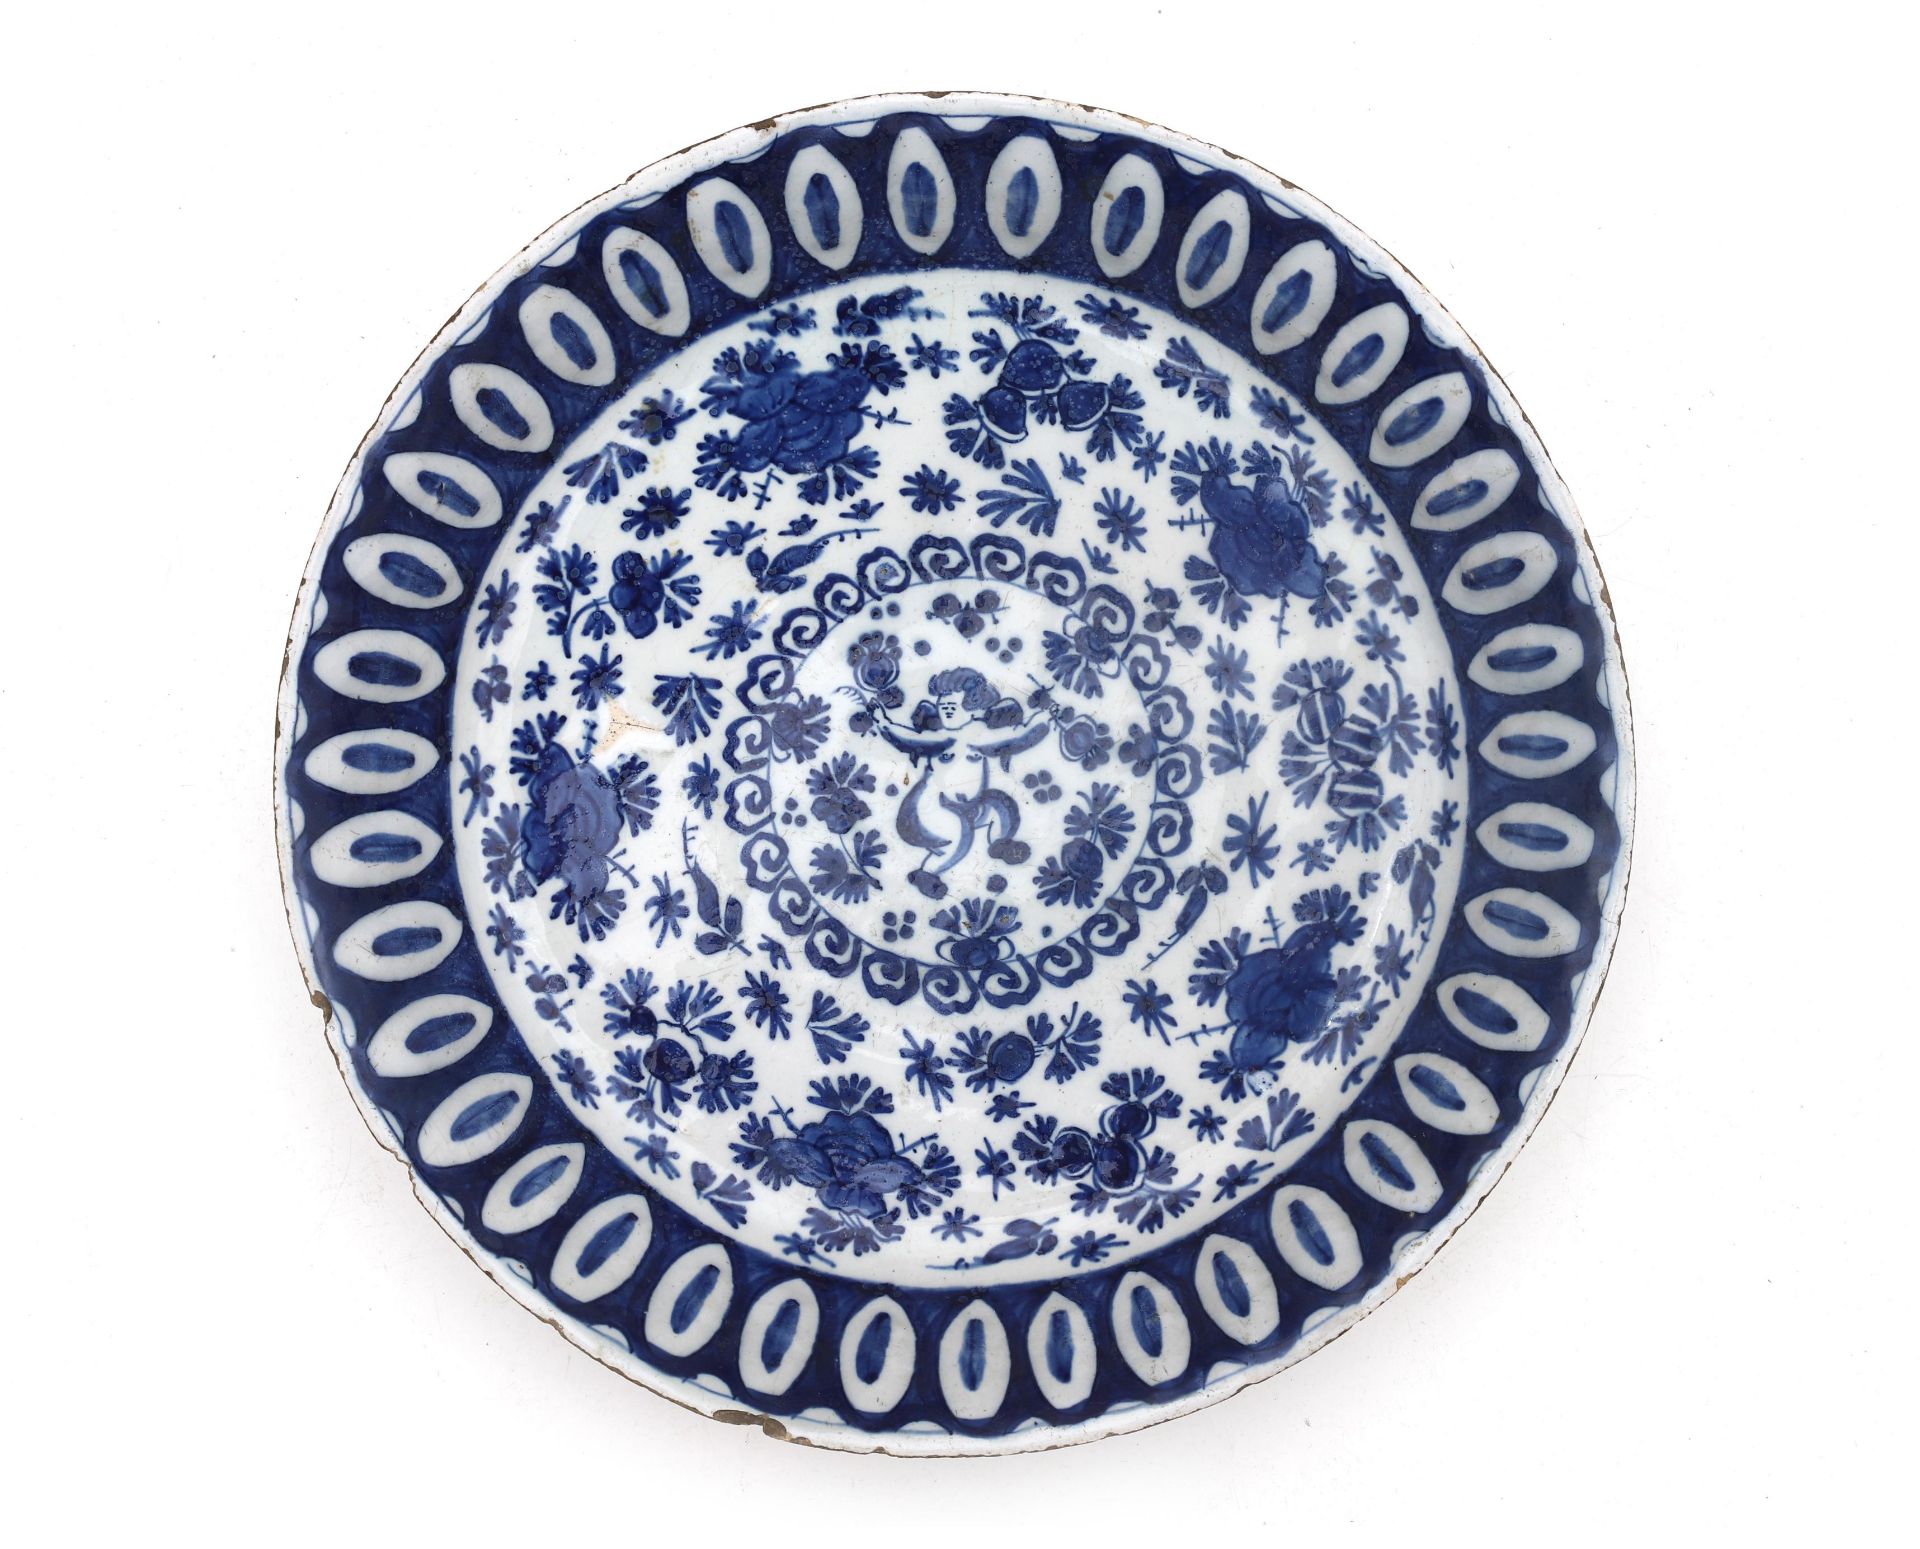 A Delft charger with blue-and-white motif, in the middle a putto, Dutch, 18th century. Diam. 30 cm.